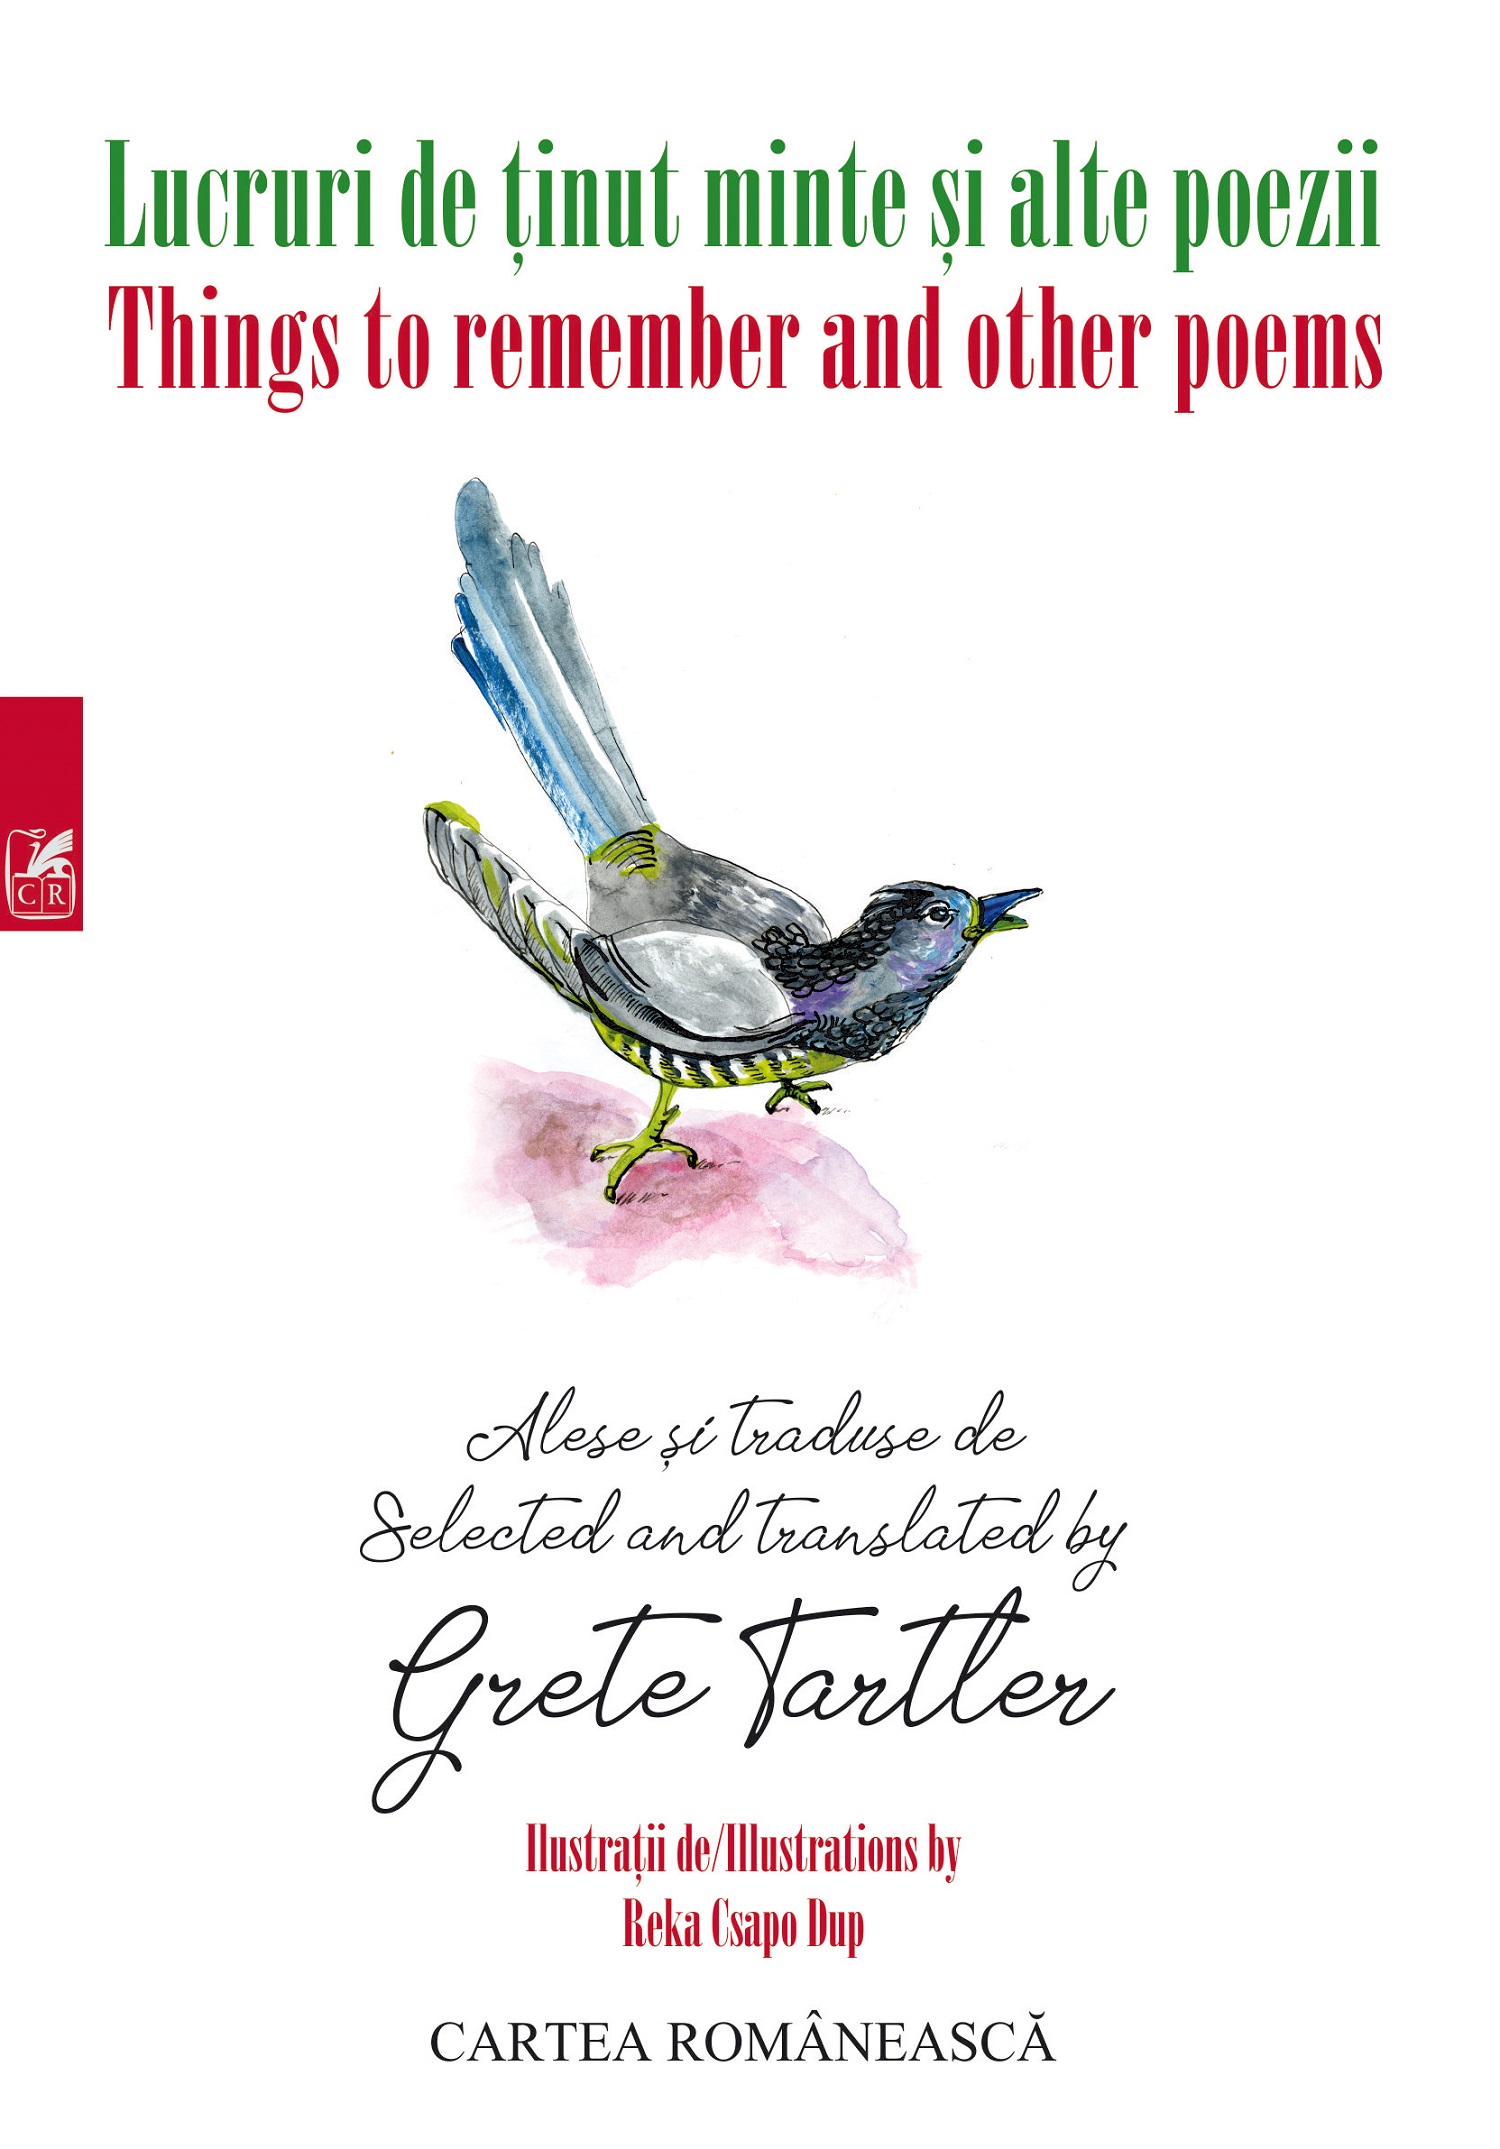 Lucruri de tinut minte si alte poeme / Things to remember and other poems | Grete Tartler adolescenti 2022